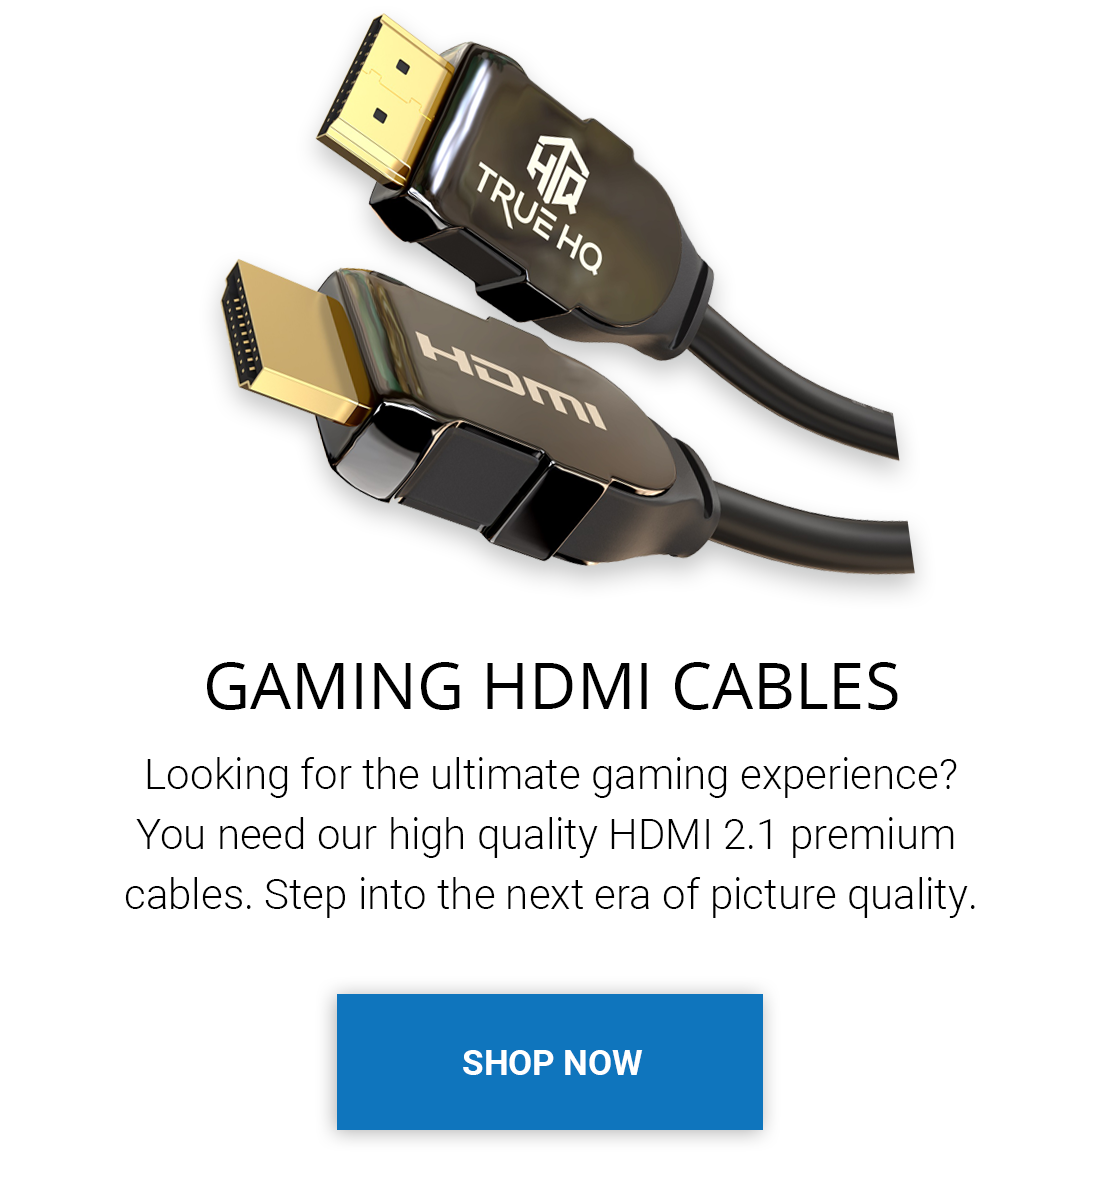 HDMI 2.1 Cable for Enhanced Gaming. 4K 8K 60hz 120hz 144hzPS4, PS5, Xbox One Series X. OLED TV. Game Mode VRR. Variable Refresh rate. Ultimate gaming experience. No lag, higher refresh rate.